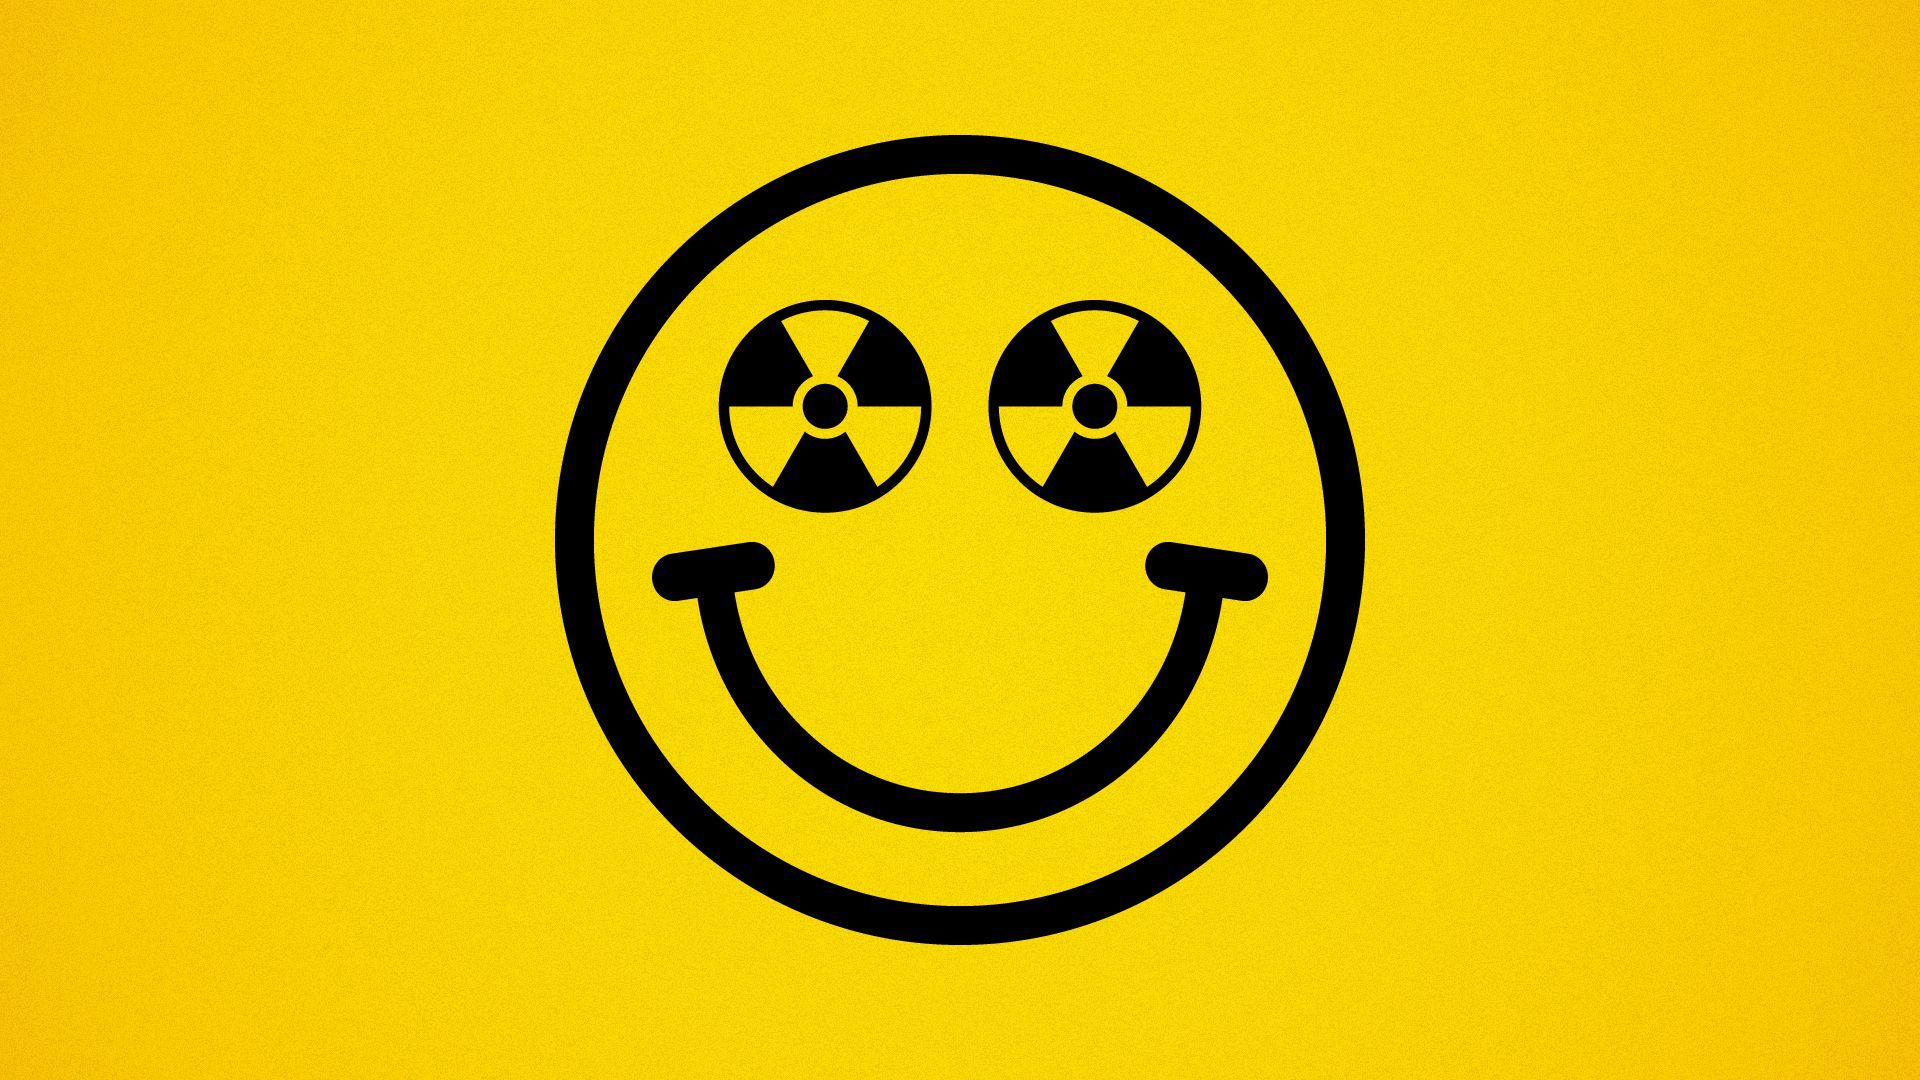 Illustration of a smiley face with radiation symbols for eyes.